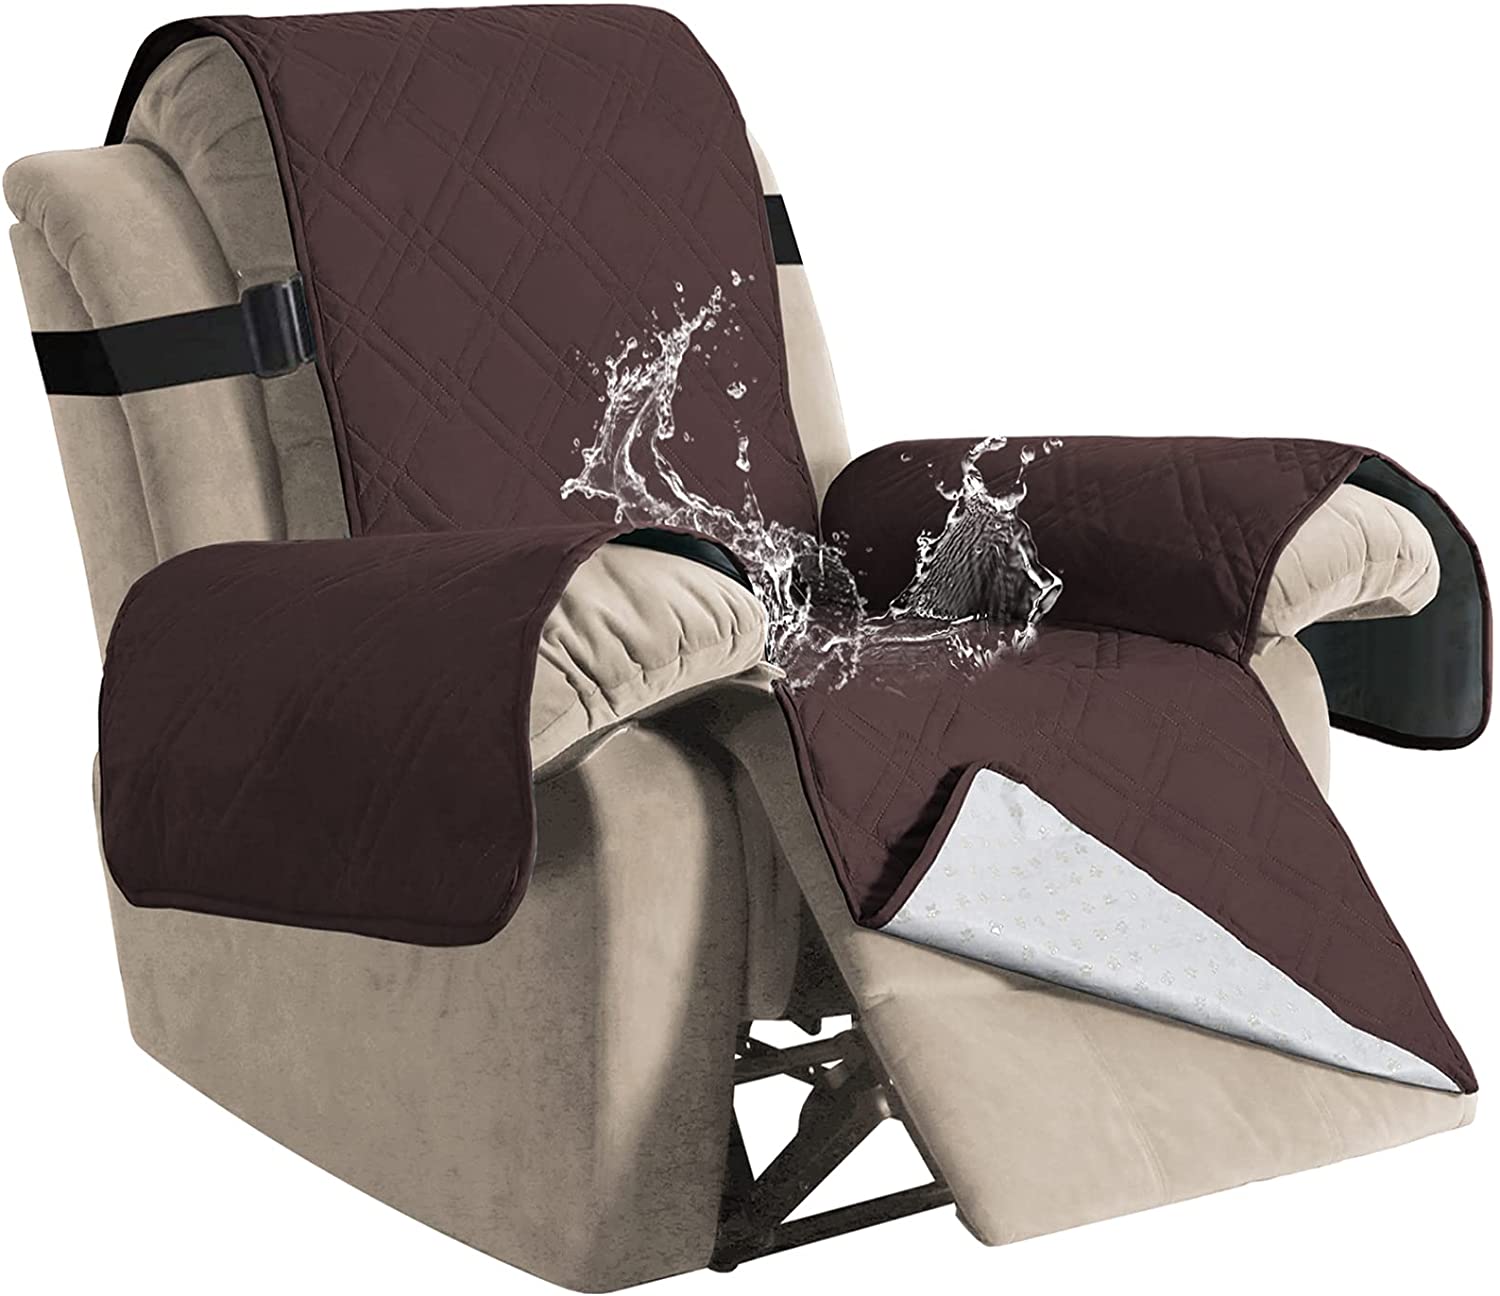 H.VERSAILTEX Non-Slip Backing Recliner Cover For Large Recliners